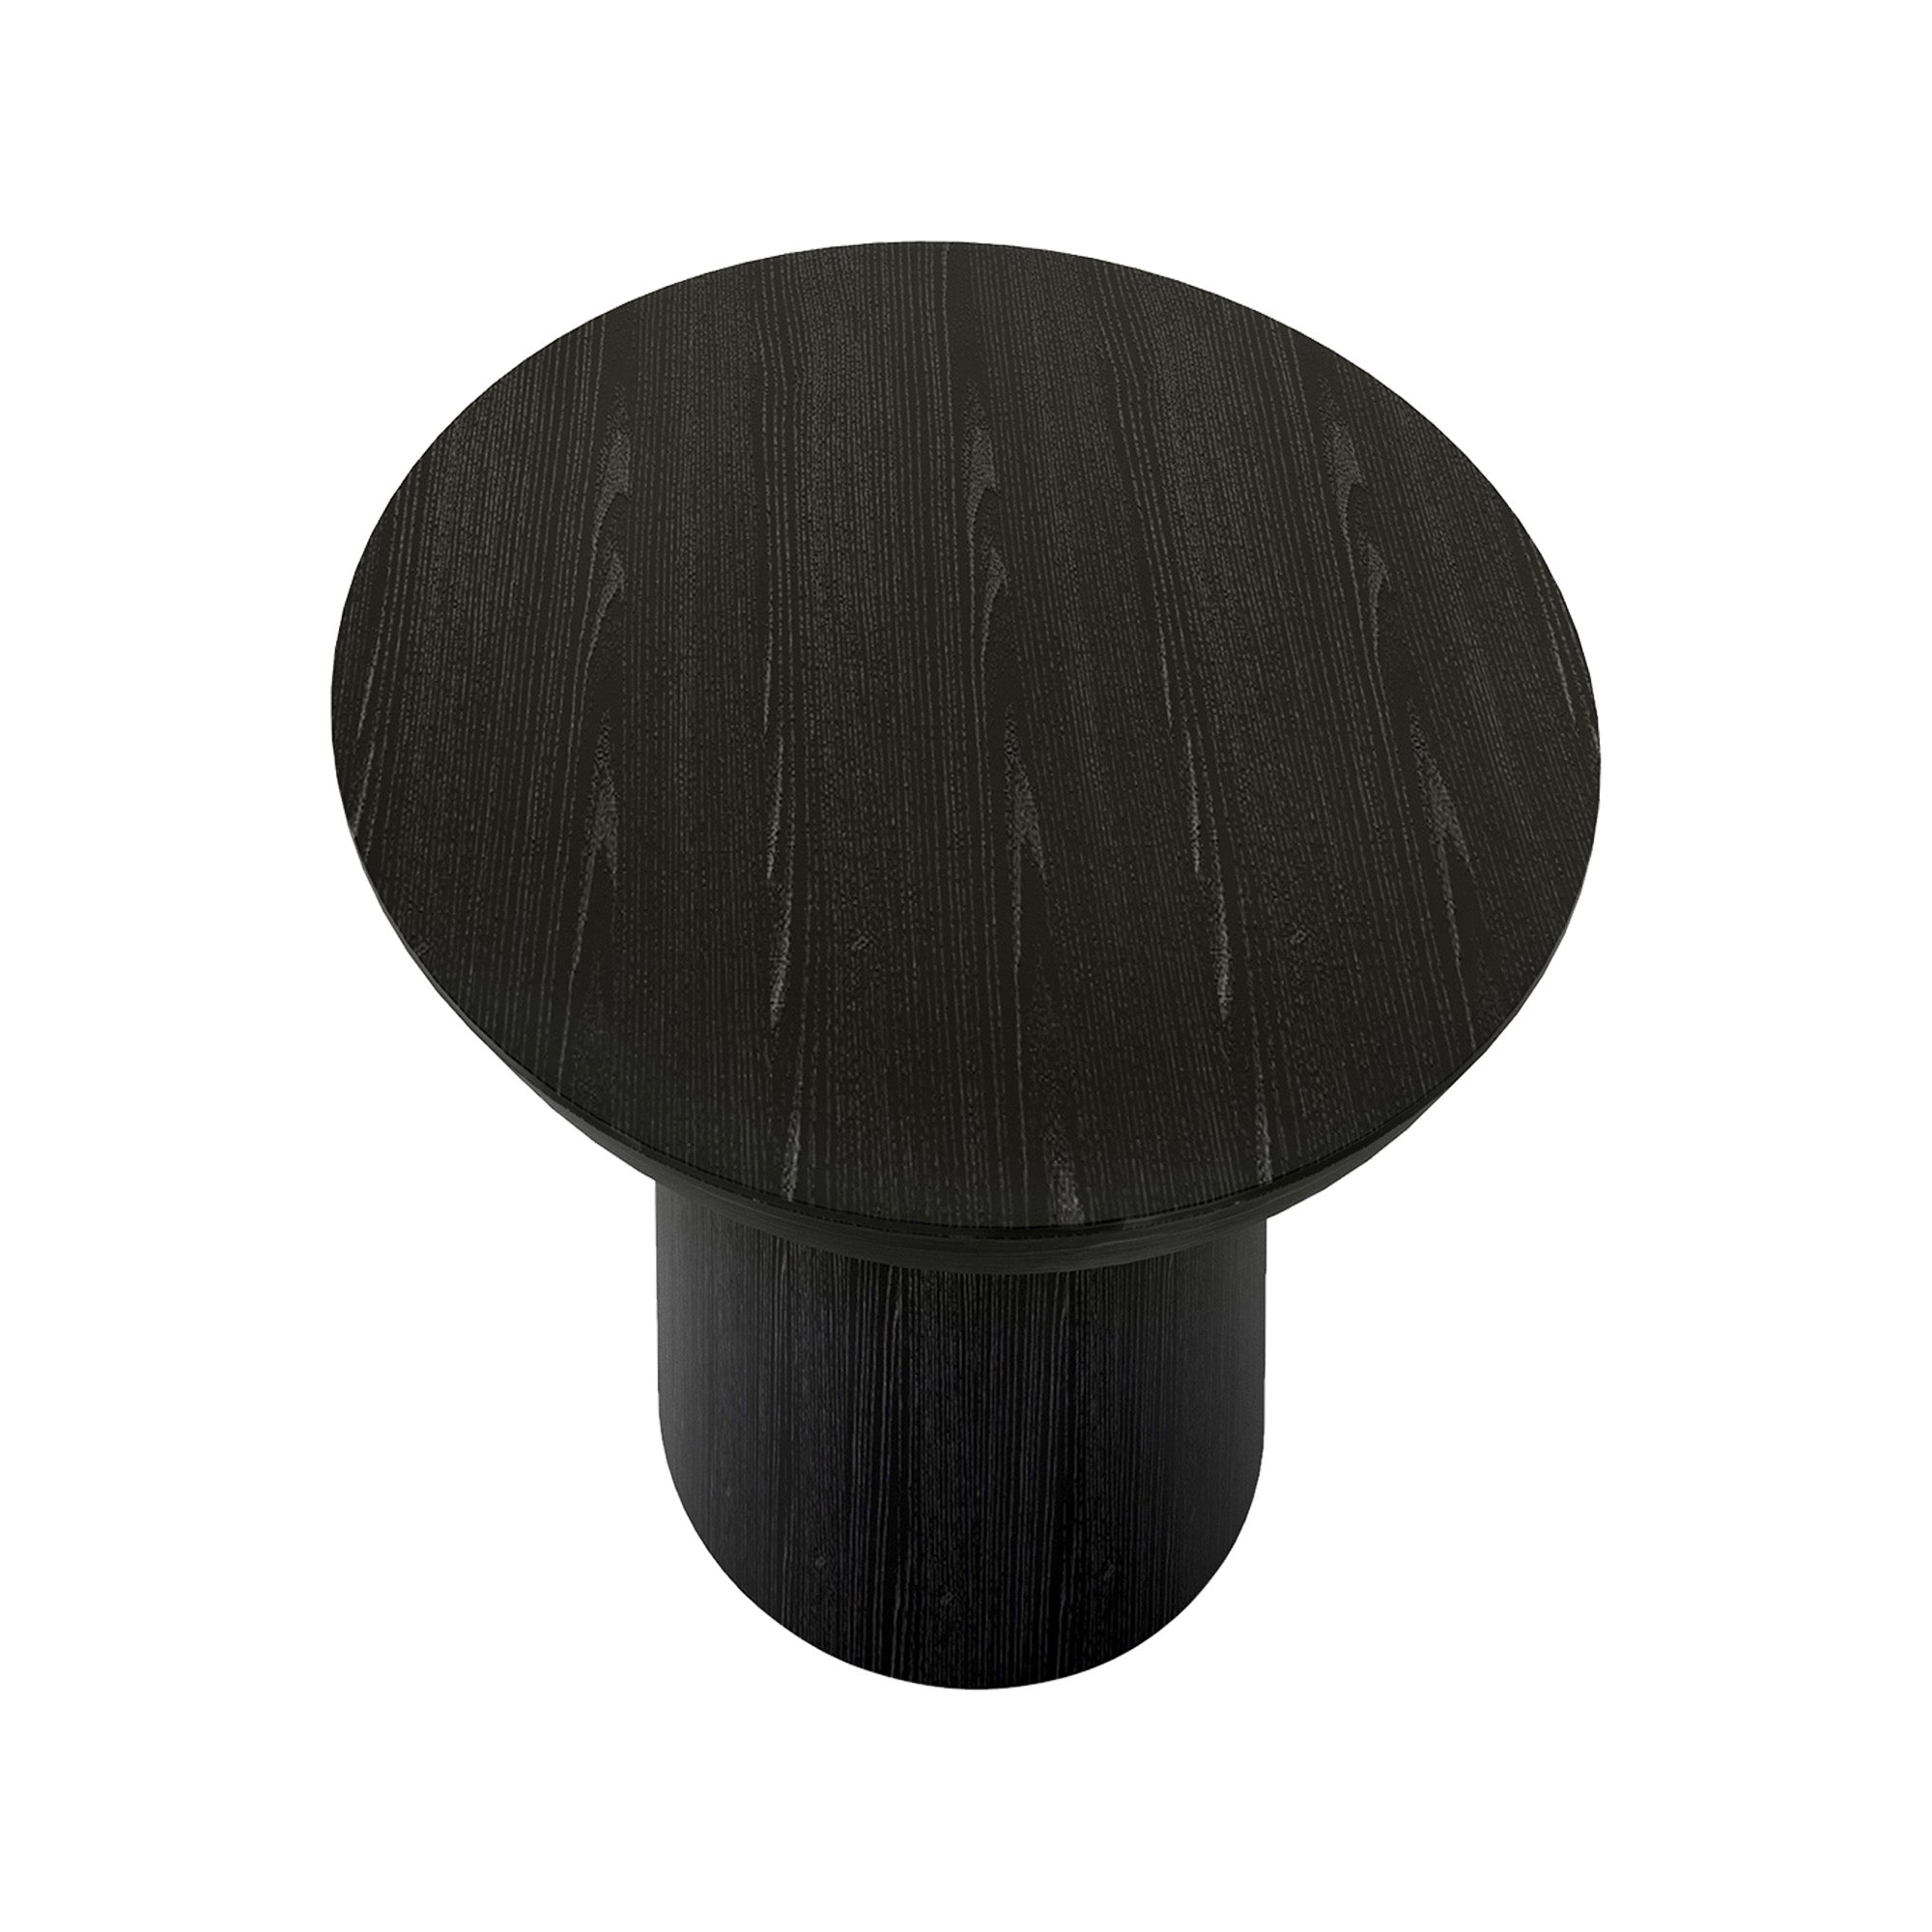 Pippa Oval Dining Table Black Small